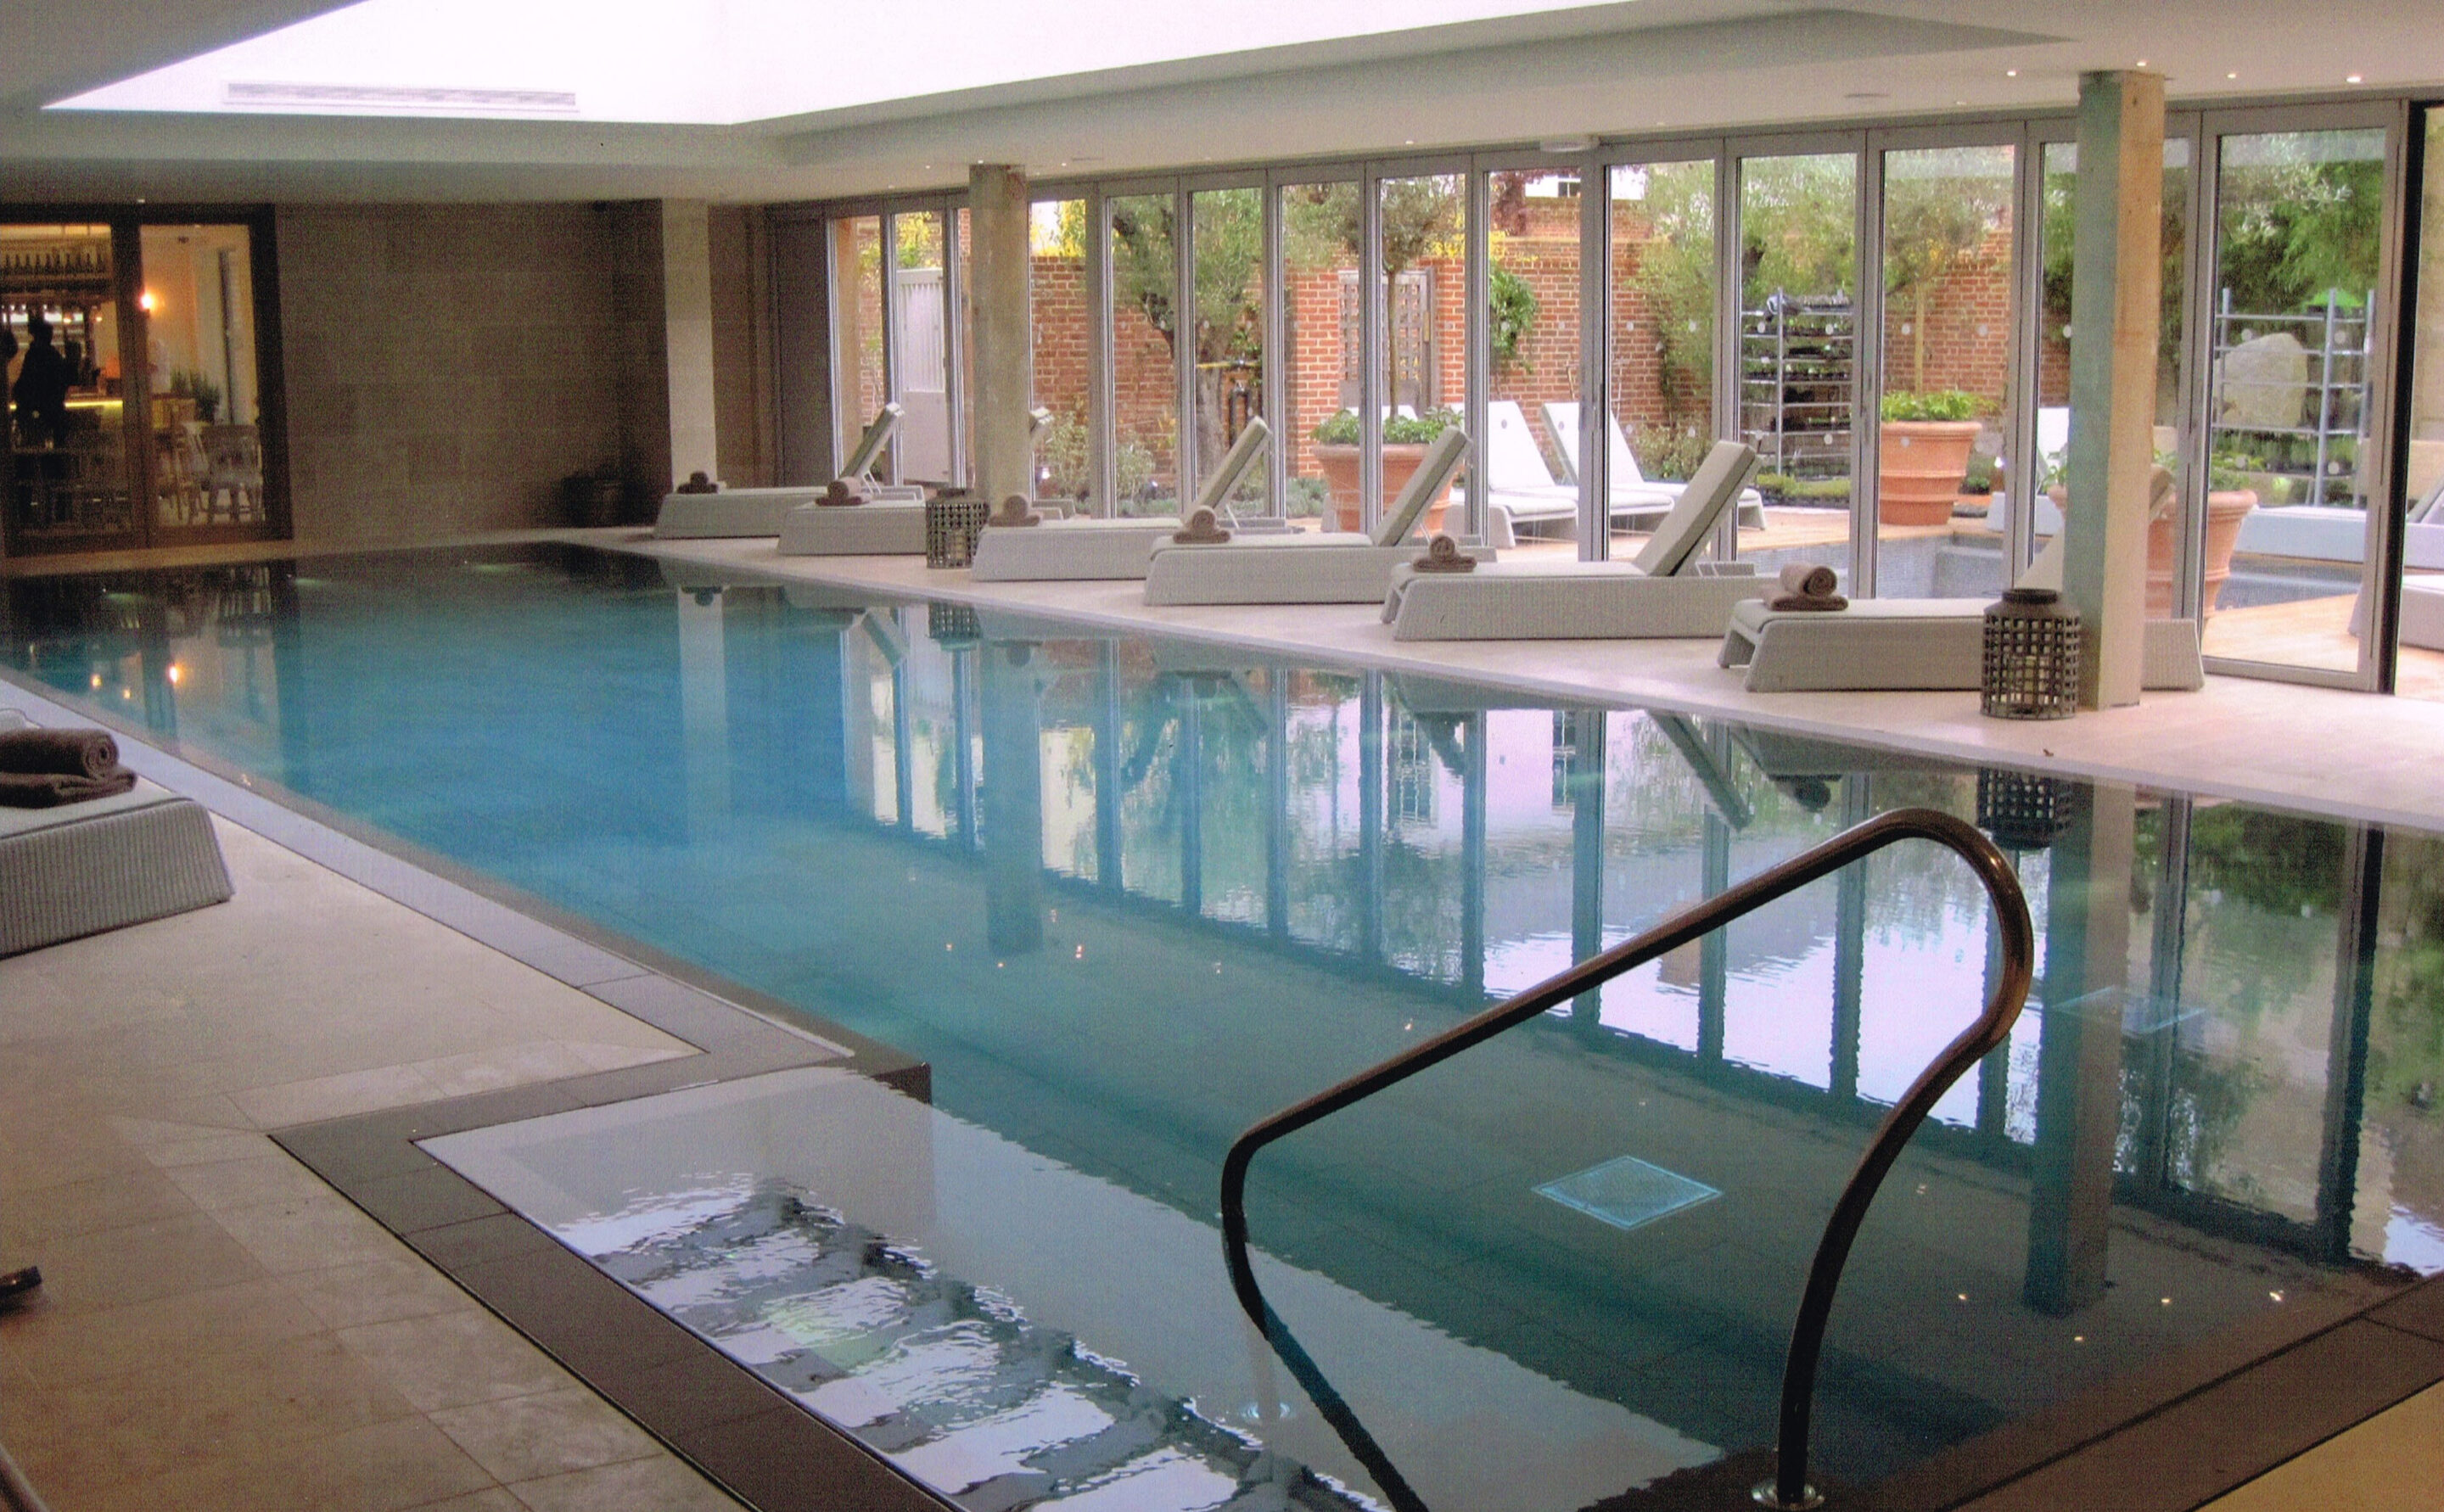 Small pools, big features: Key commercial swimming pool trends